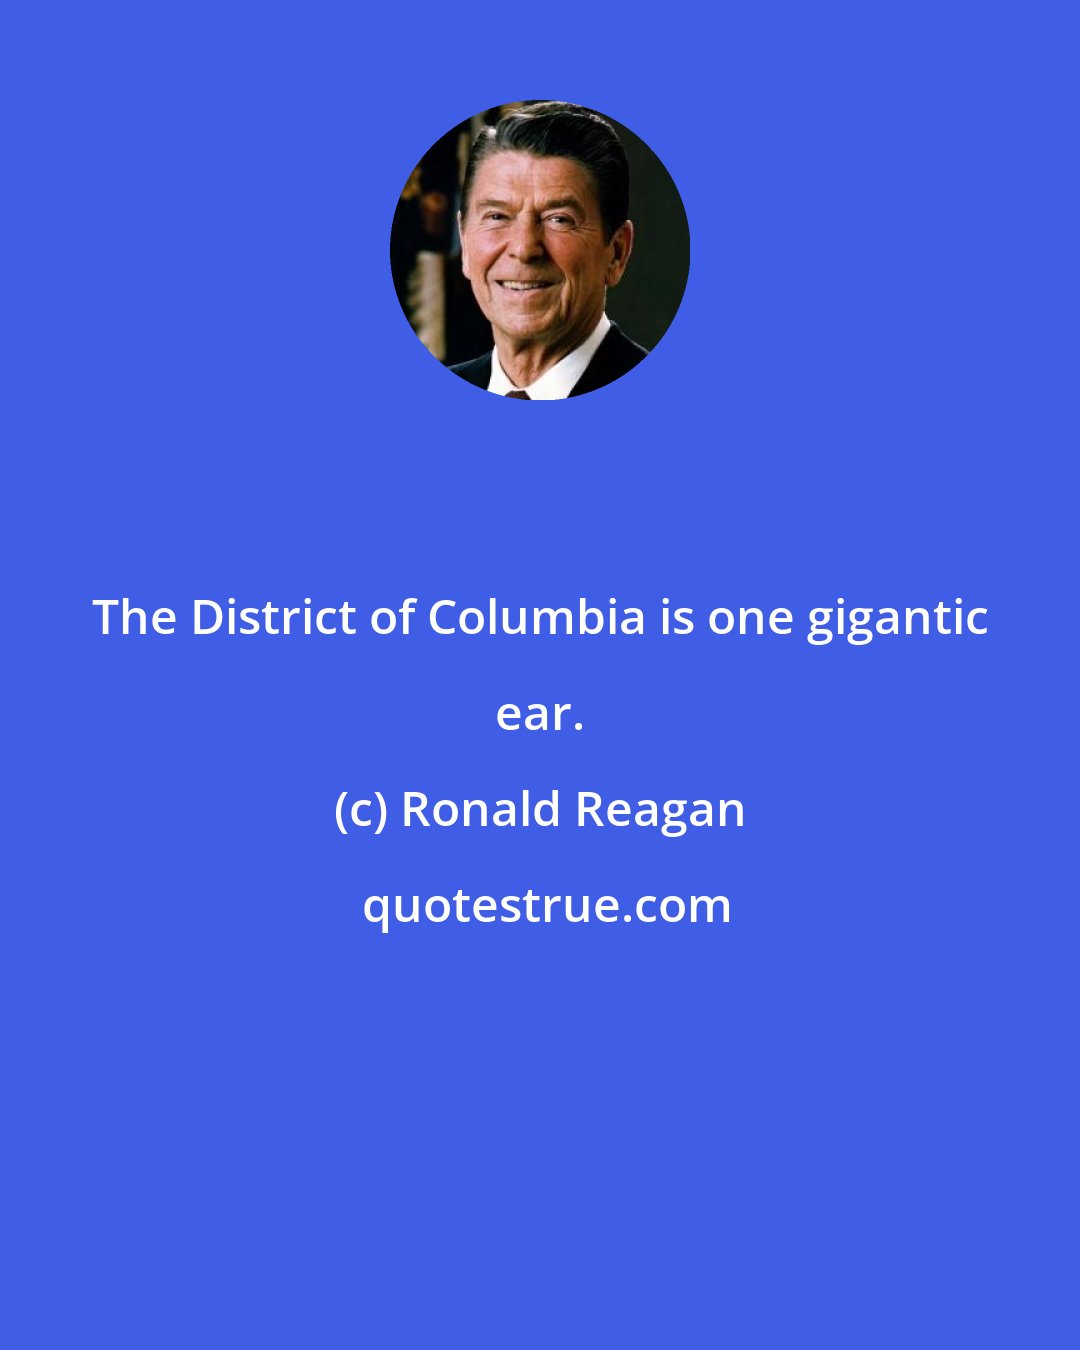 Ronald Reagan: The District of Columbia is one gigantic ear.